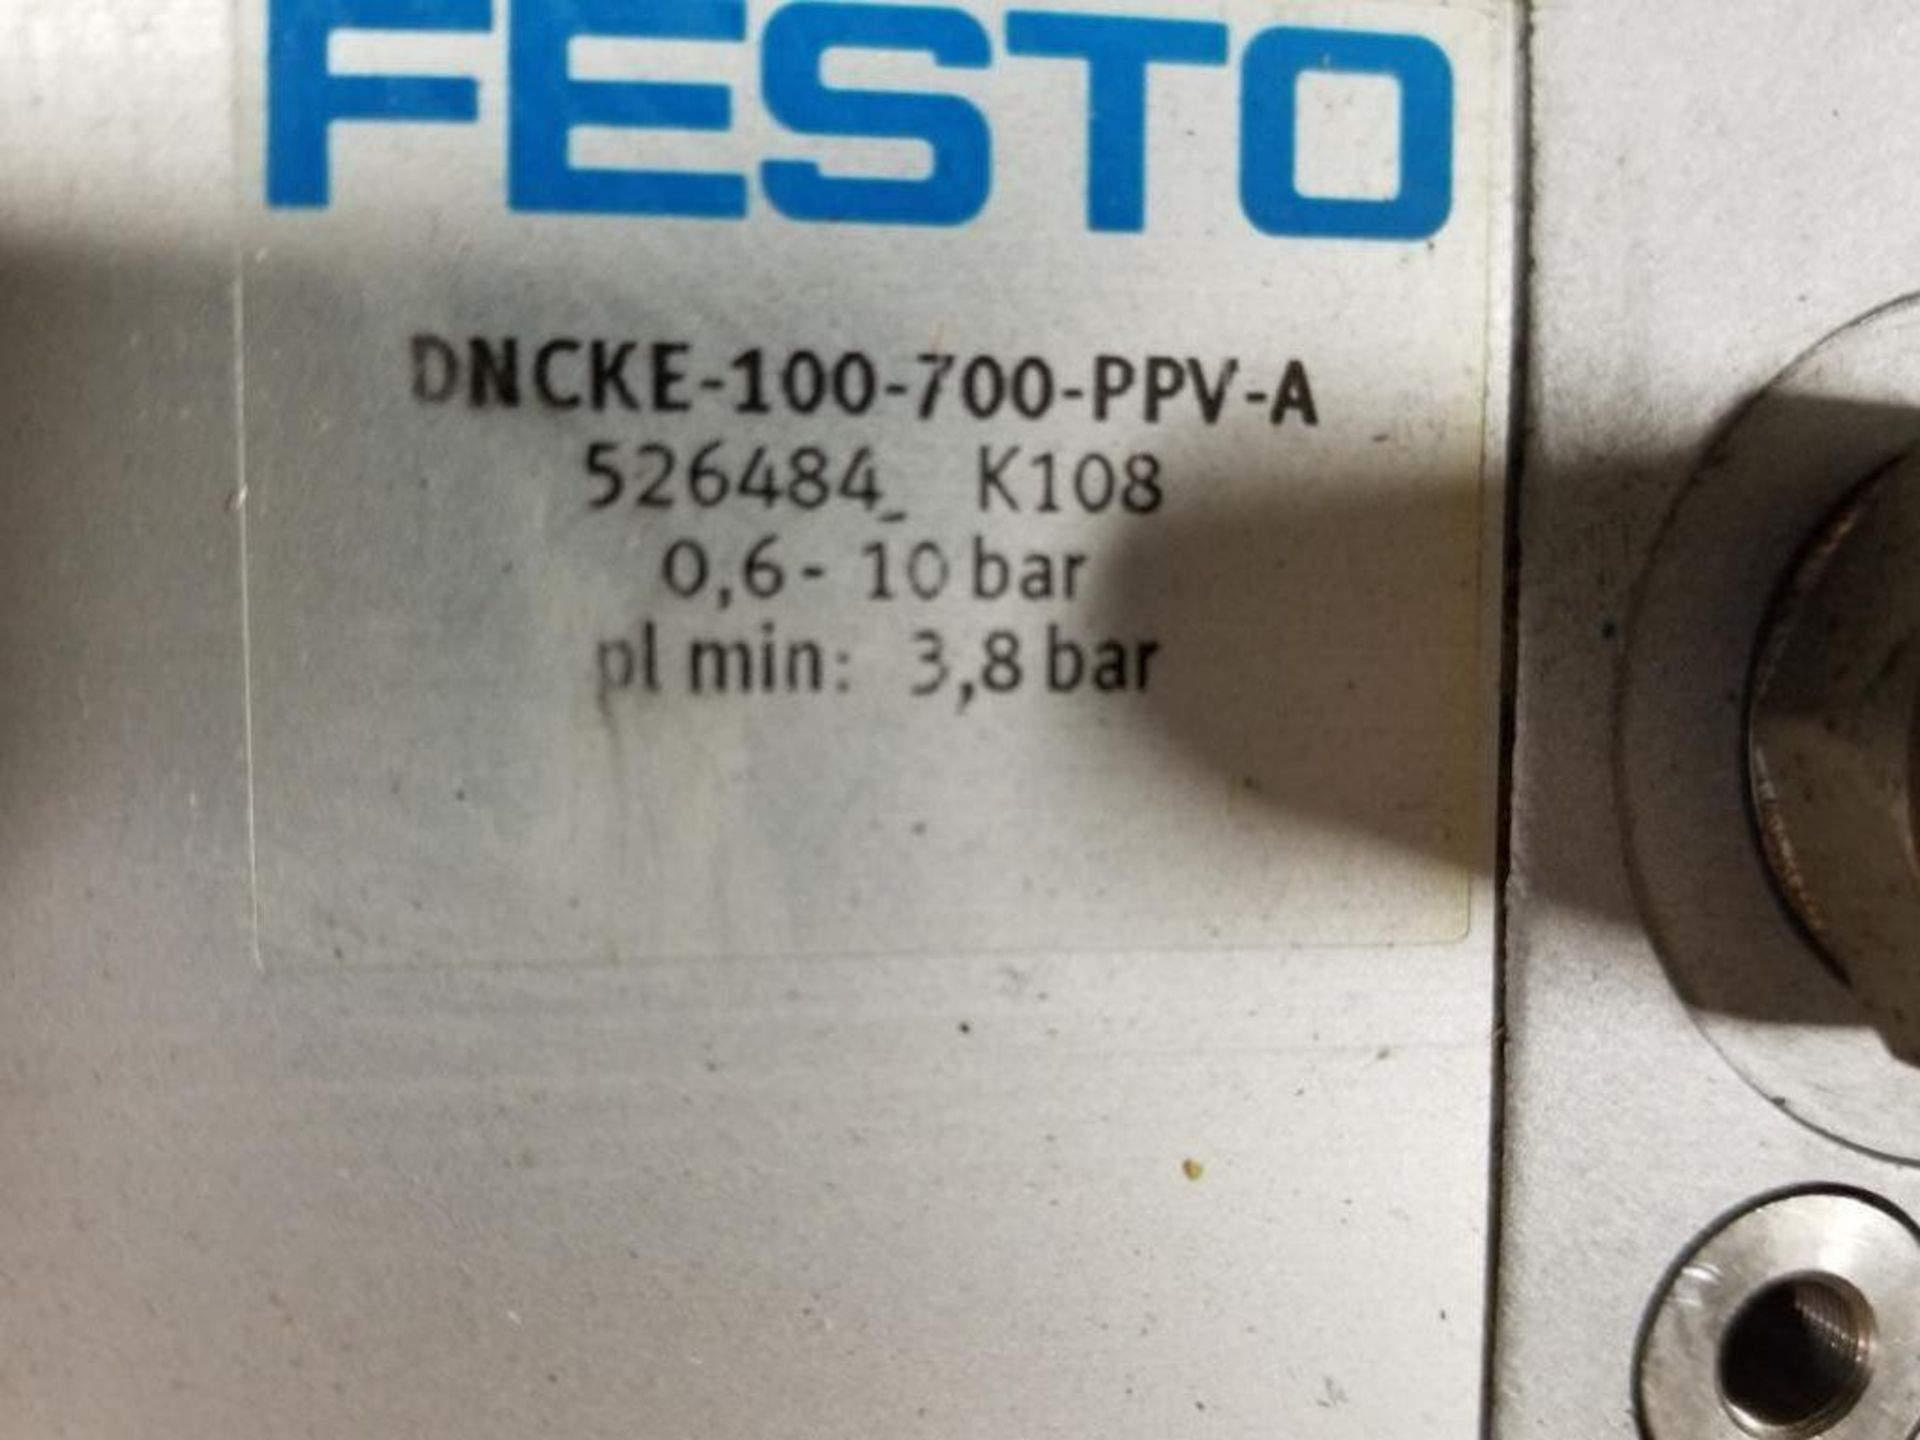 Festo DNCKE-100-700-PPV-A pneumatic cylinder. - Image 2 of 4